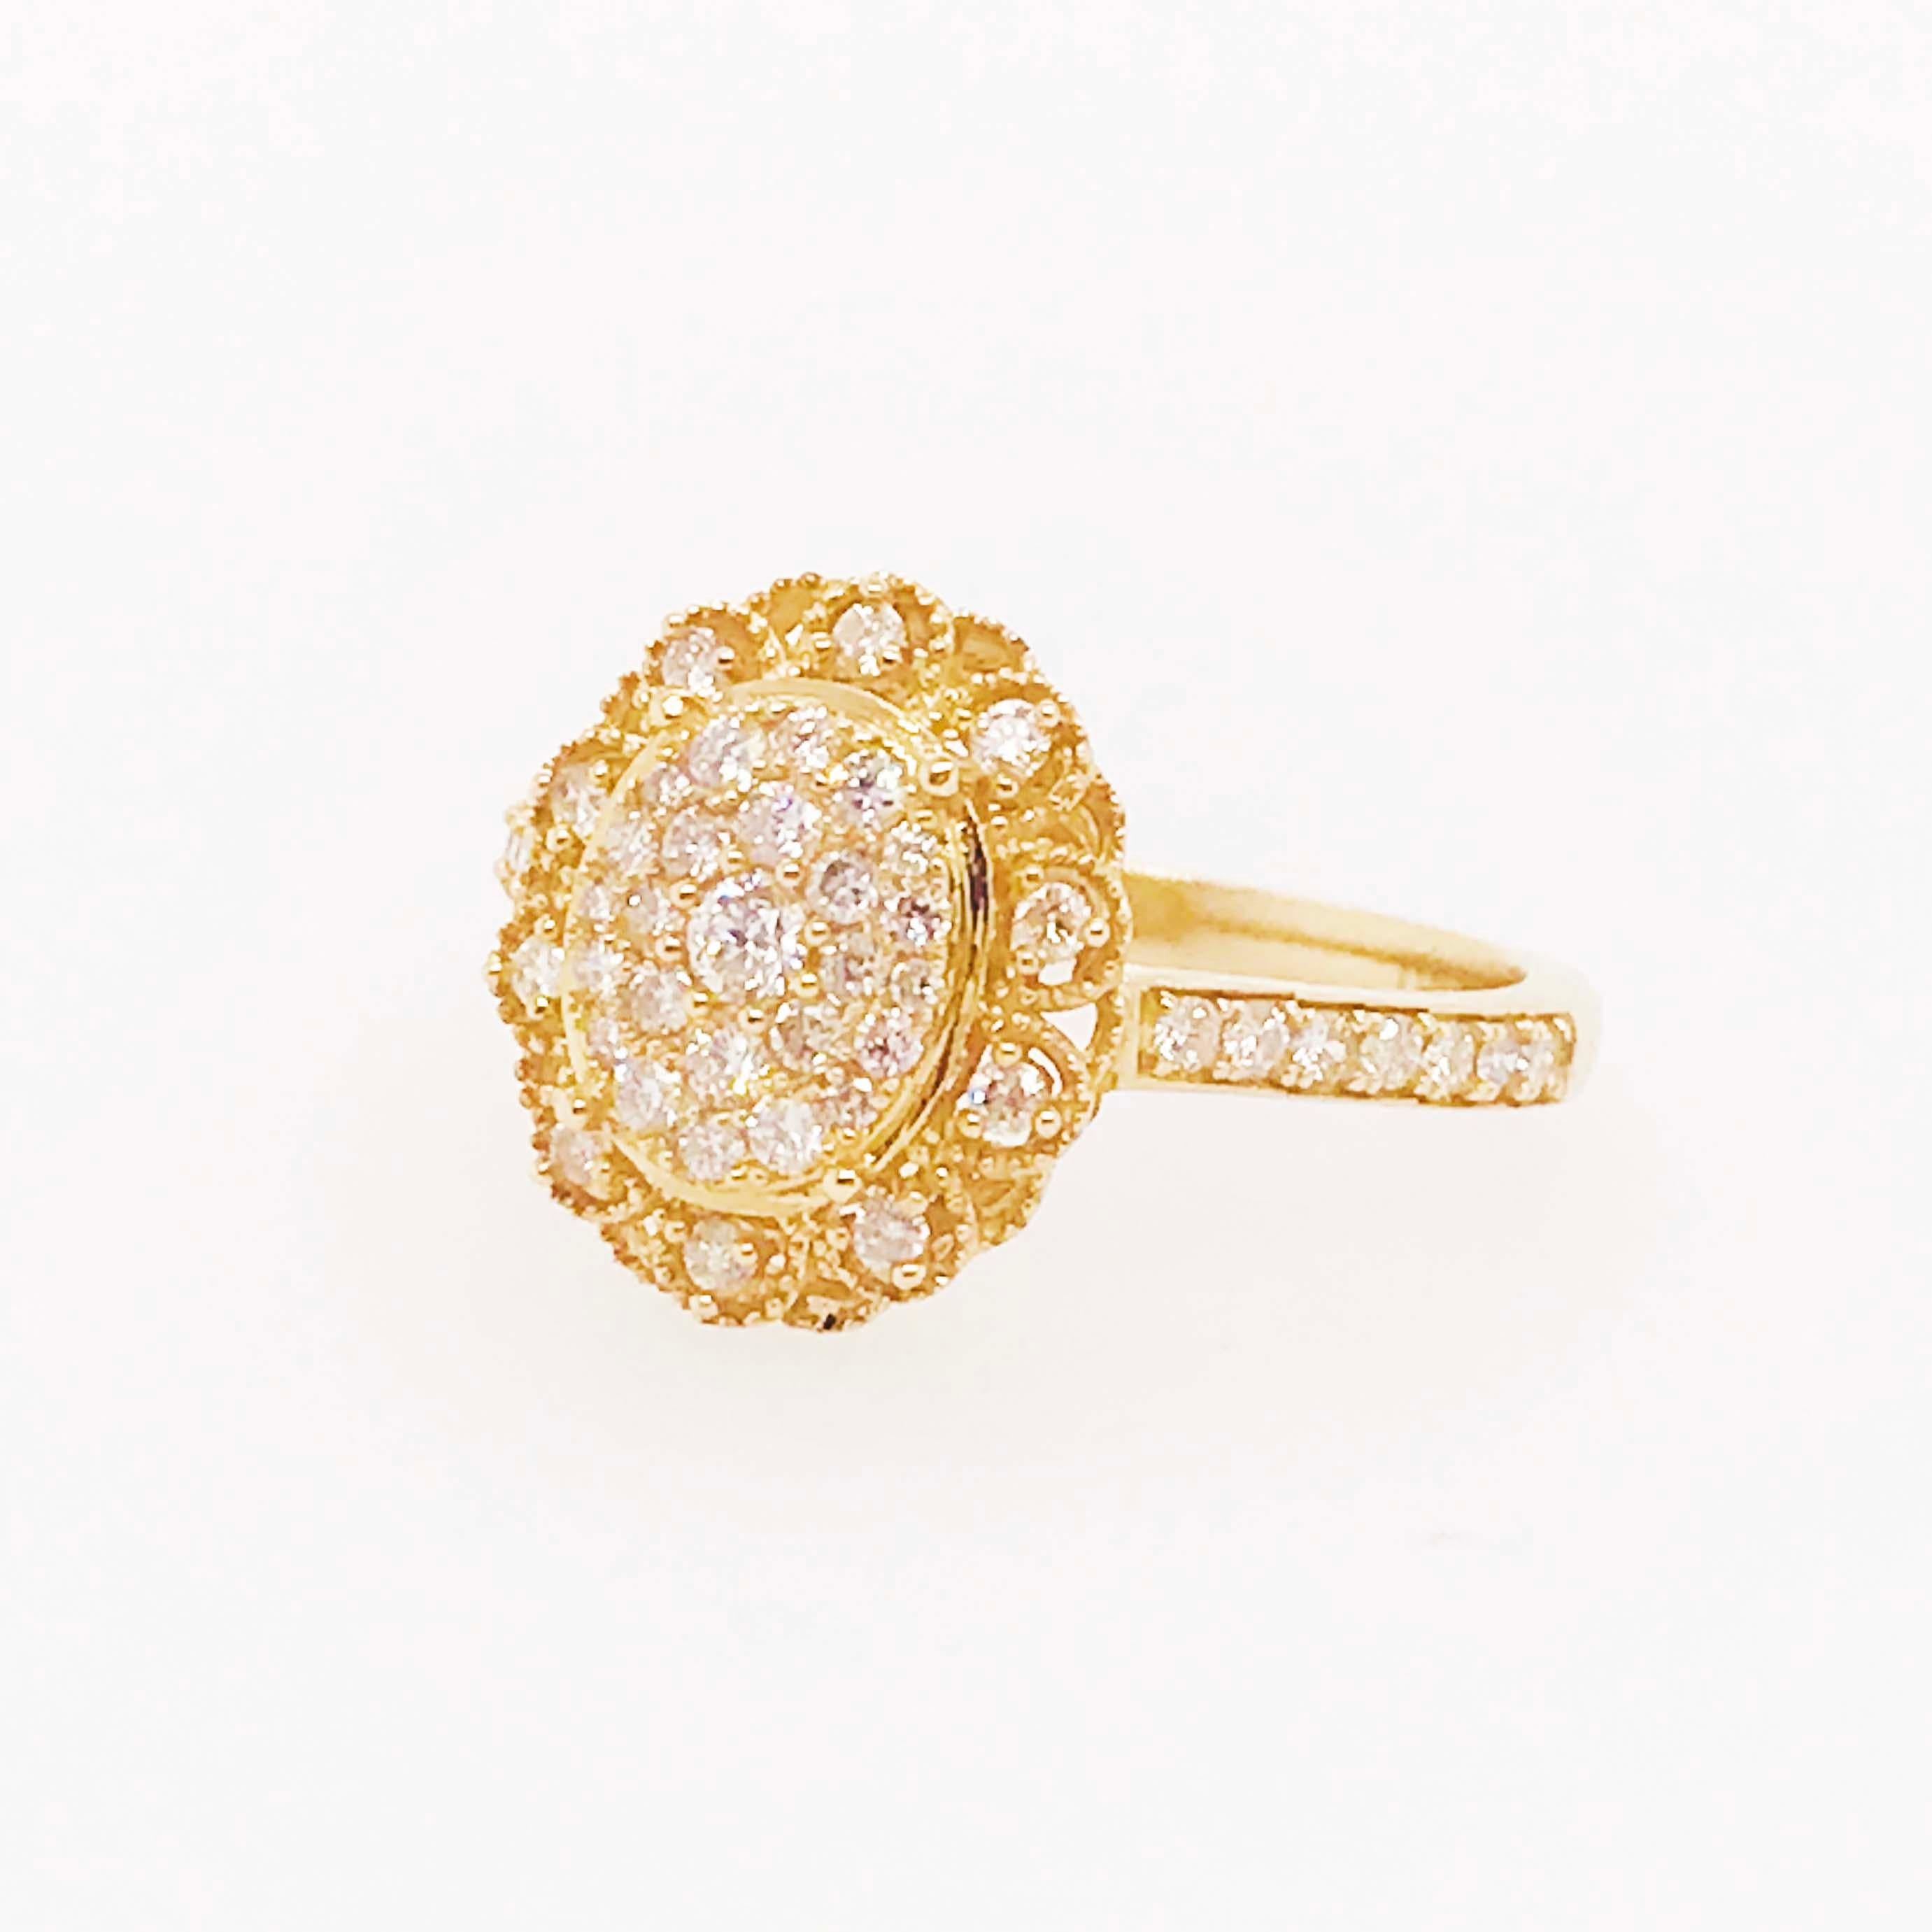 Antique Inspired Oval Pave 1/2 Carat Diamond Engagement Ring in Yellow Gold 3